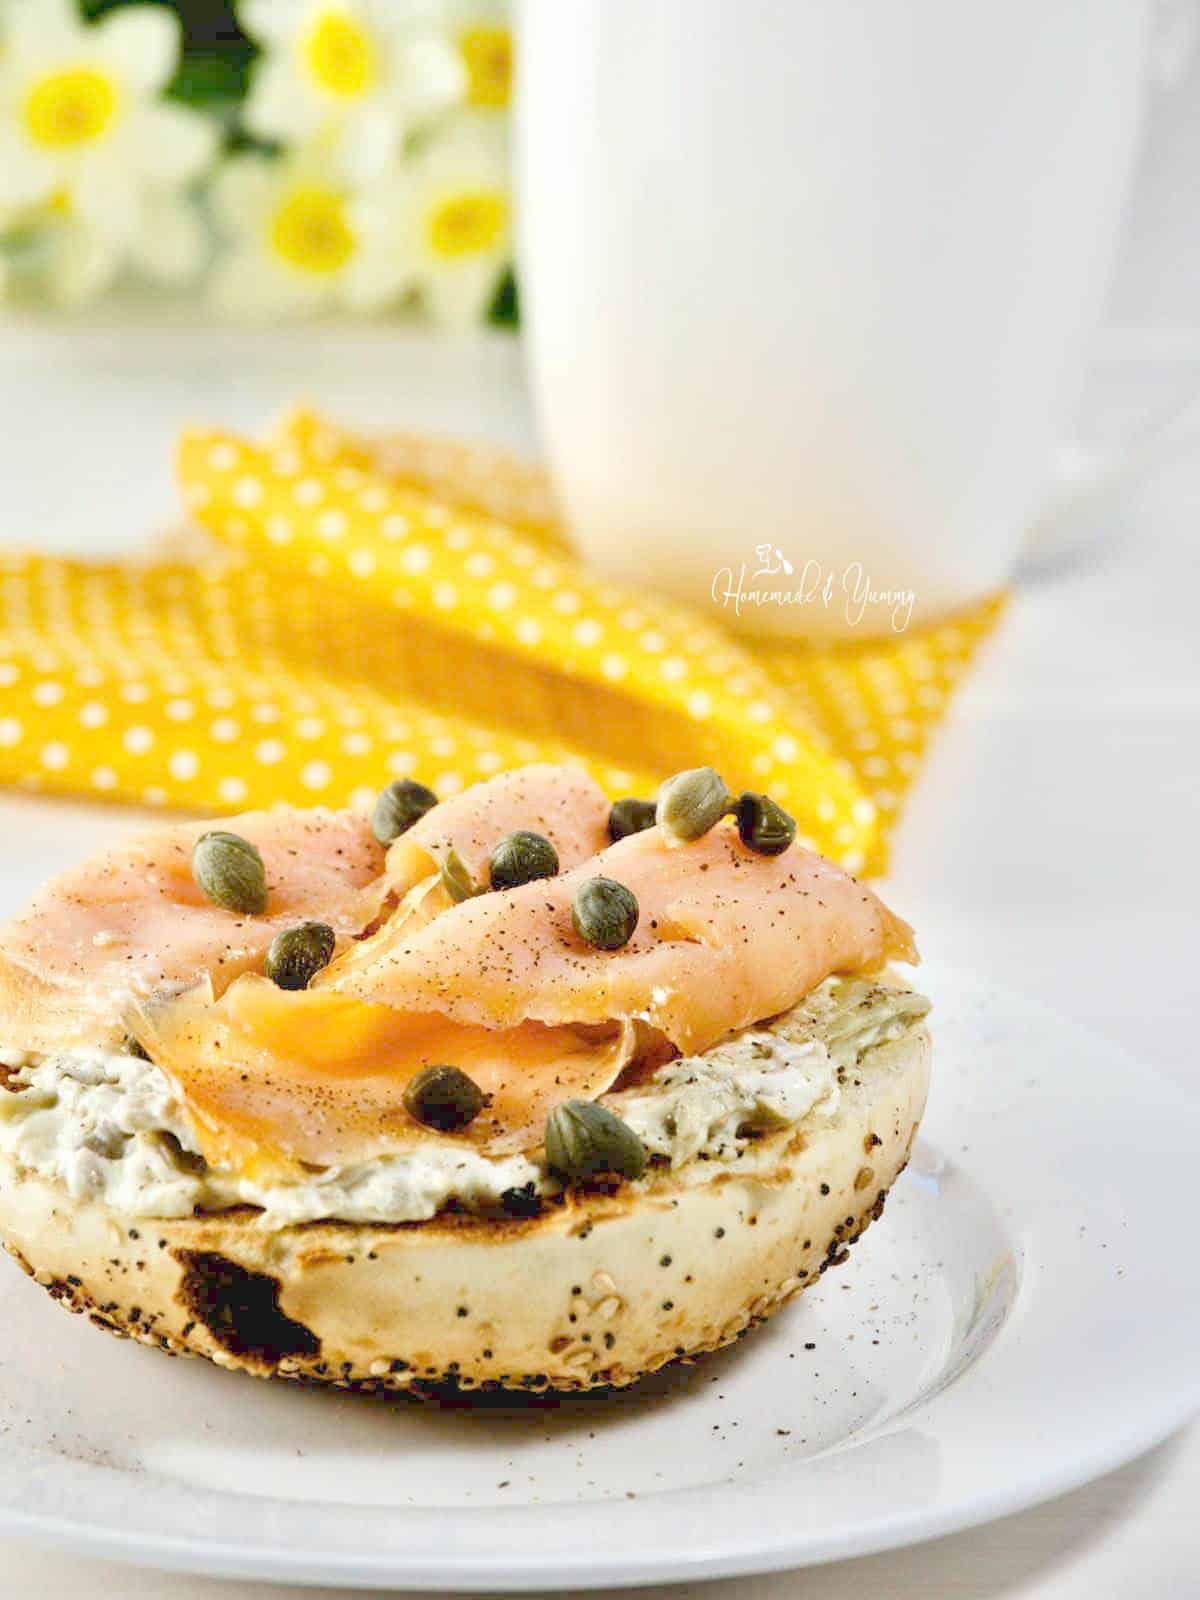 Smoked salmon on a bagel with cream cheese and capers.